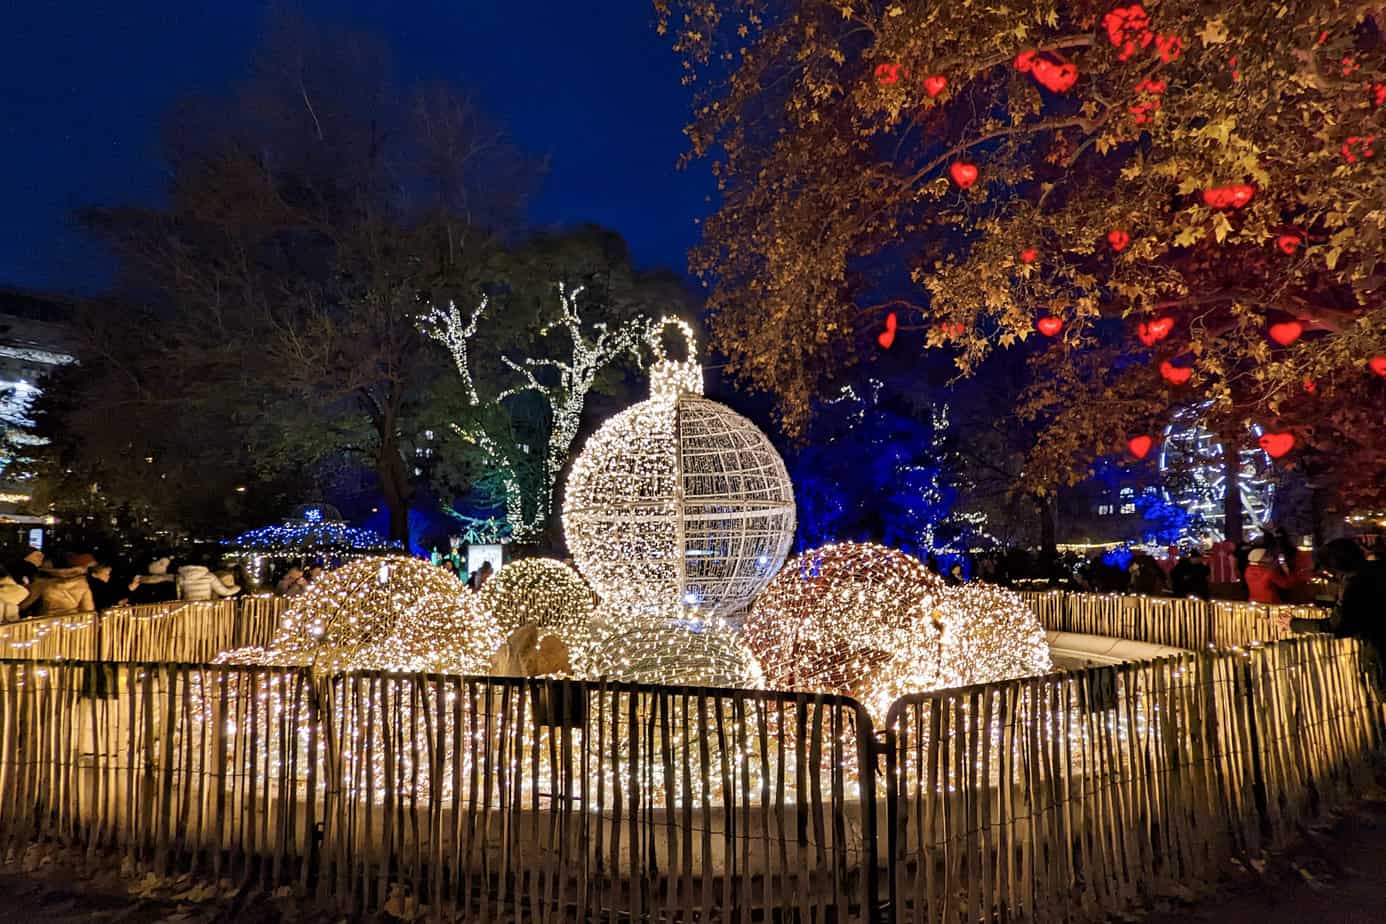 Large round ornaments made from twinkle lights